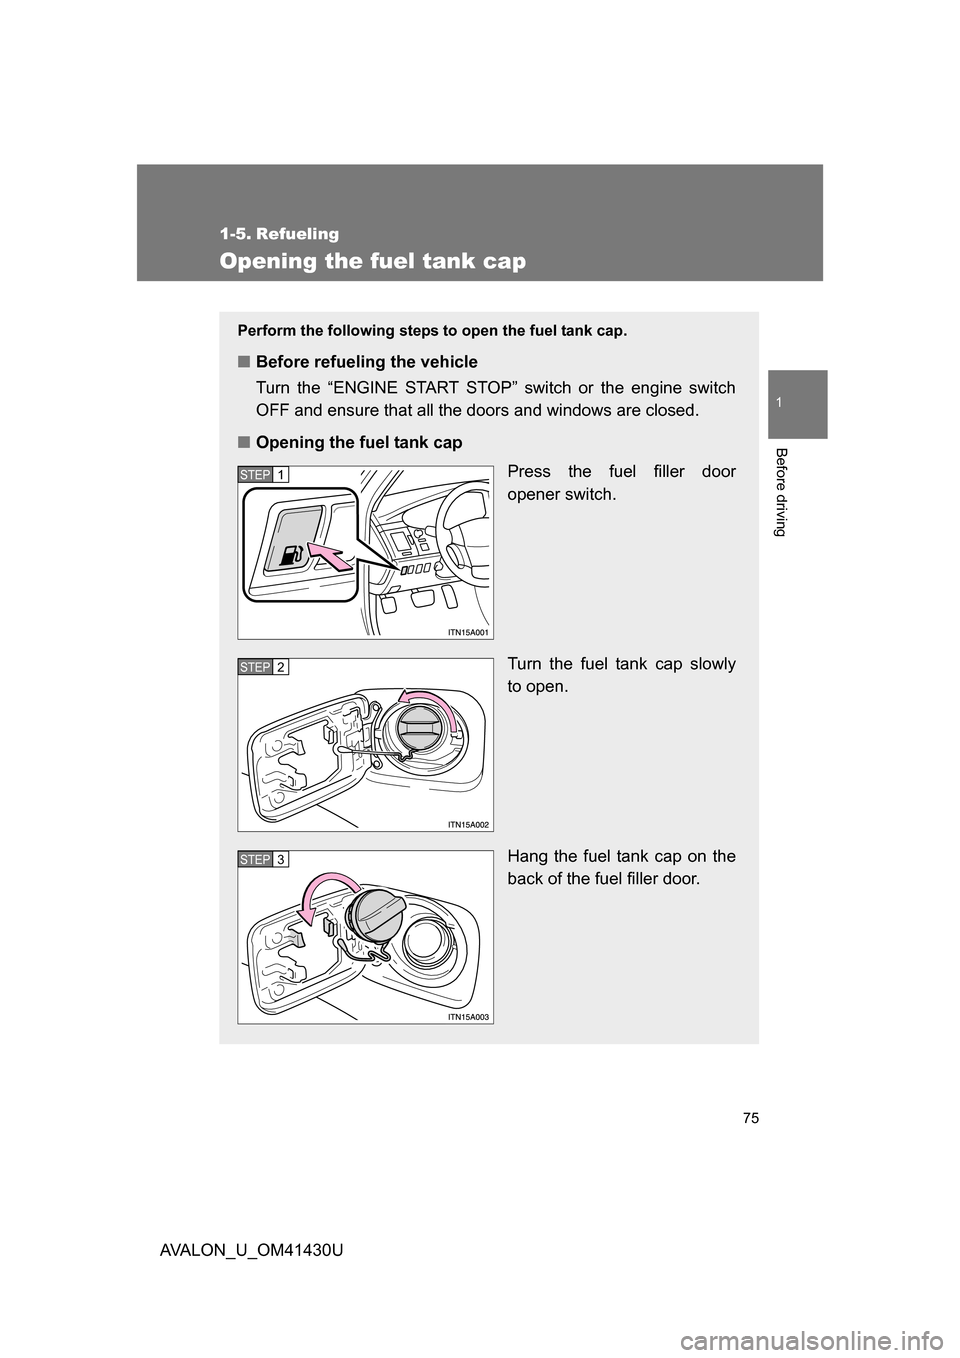 TOYOTA AVALON 2009 XX30 / 3.G Manual PDF 75
1
Before driving
AVALON_U_OM41430U
1-5. Refueling
Opening the fuel tank cap
Perform the following steps to open the fuel tank cap. 
■Before refueling the vehicle
Turn the “ENGINE START STOP” 